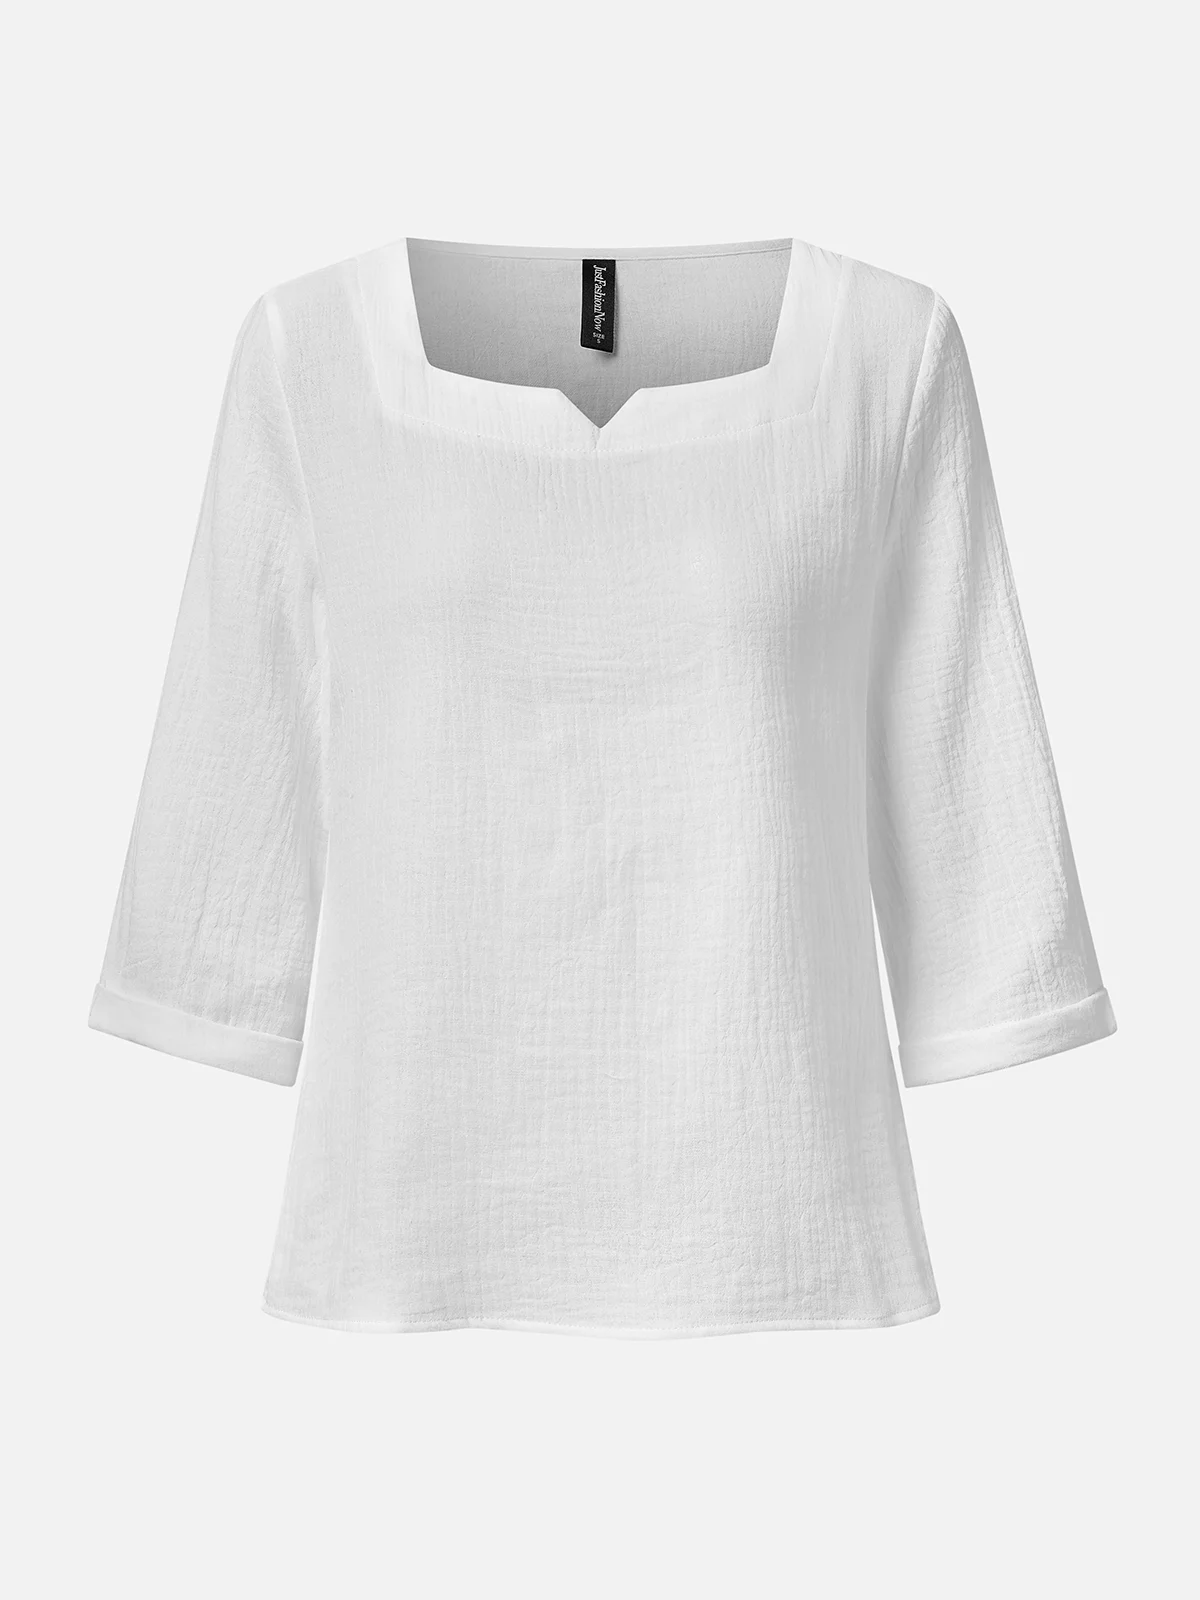 Women's 3/4 Sleeve Summer Blouse Plain Cotton Square Neck Notched Daily Going Out Simple Top Spring/Fall White